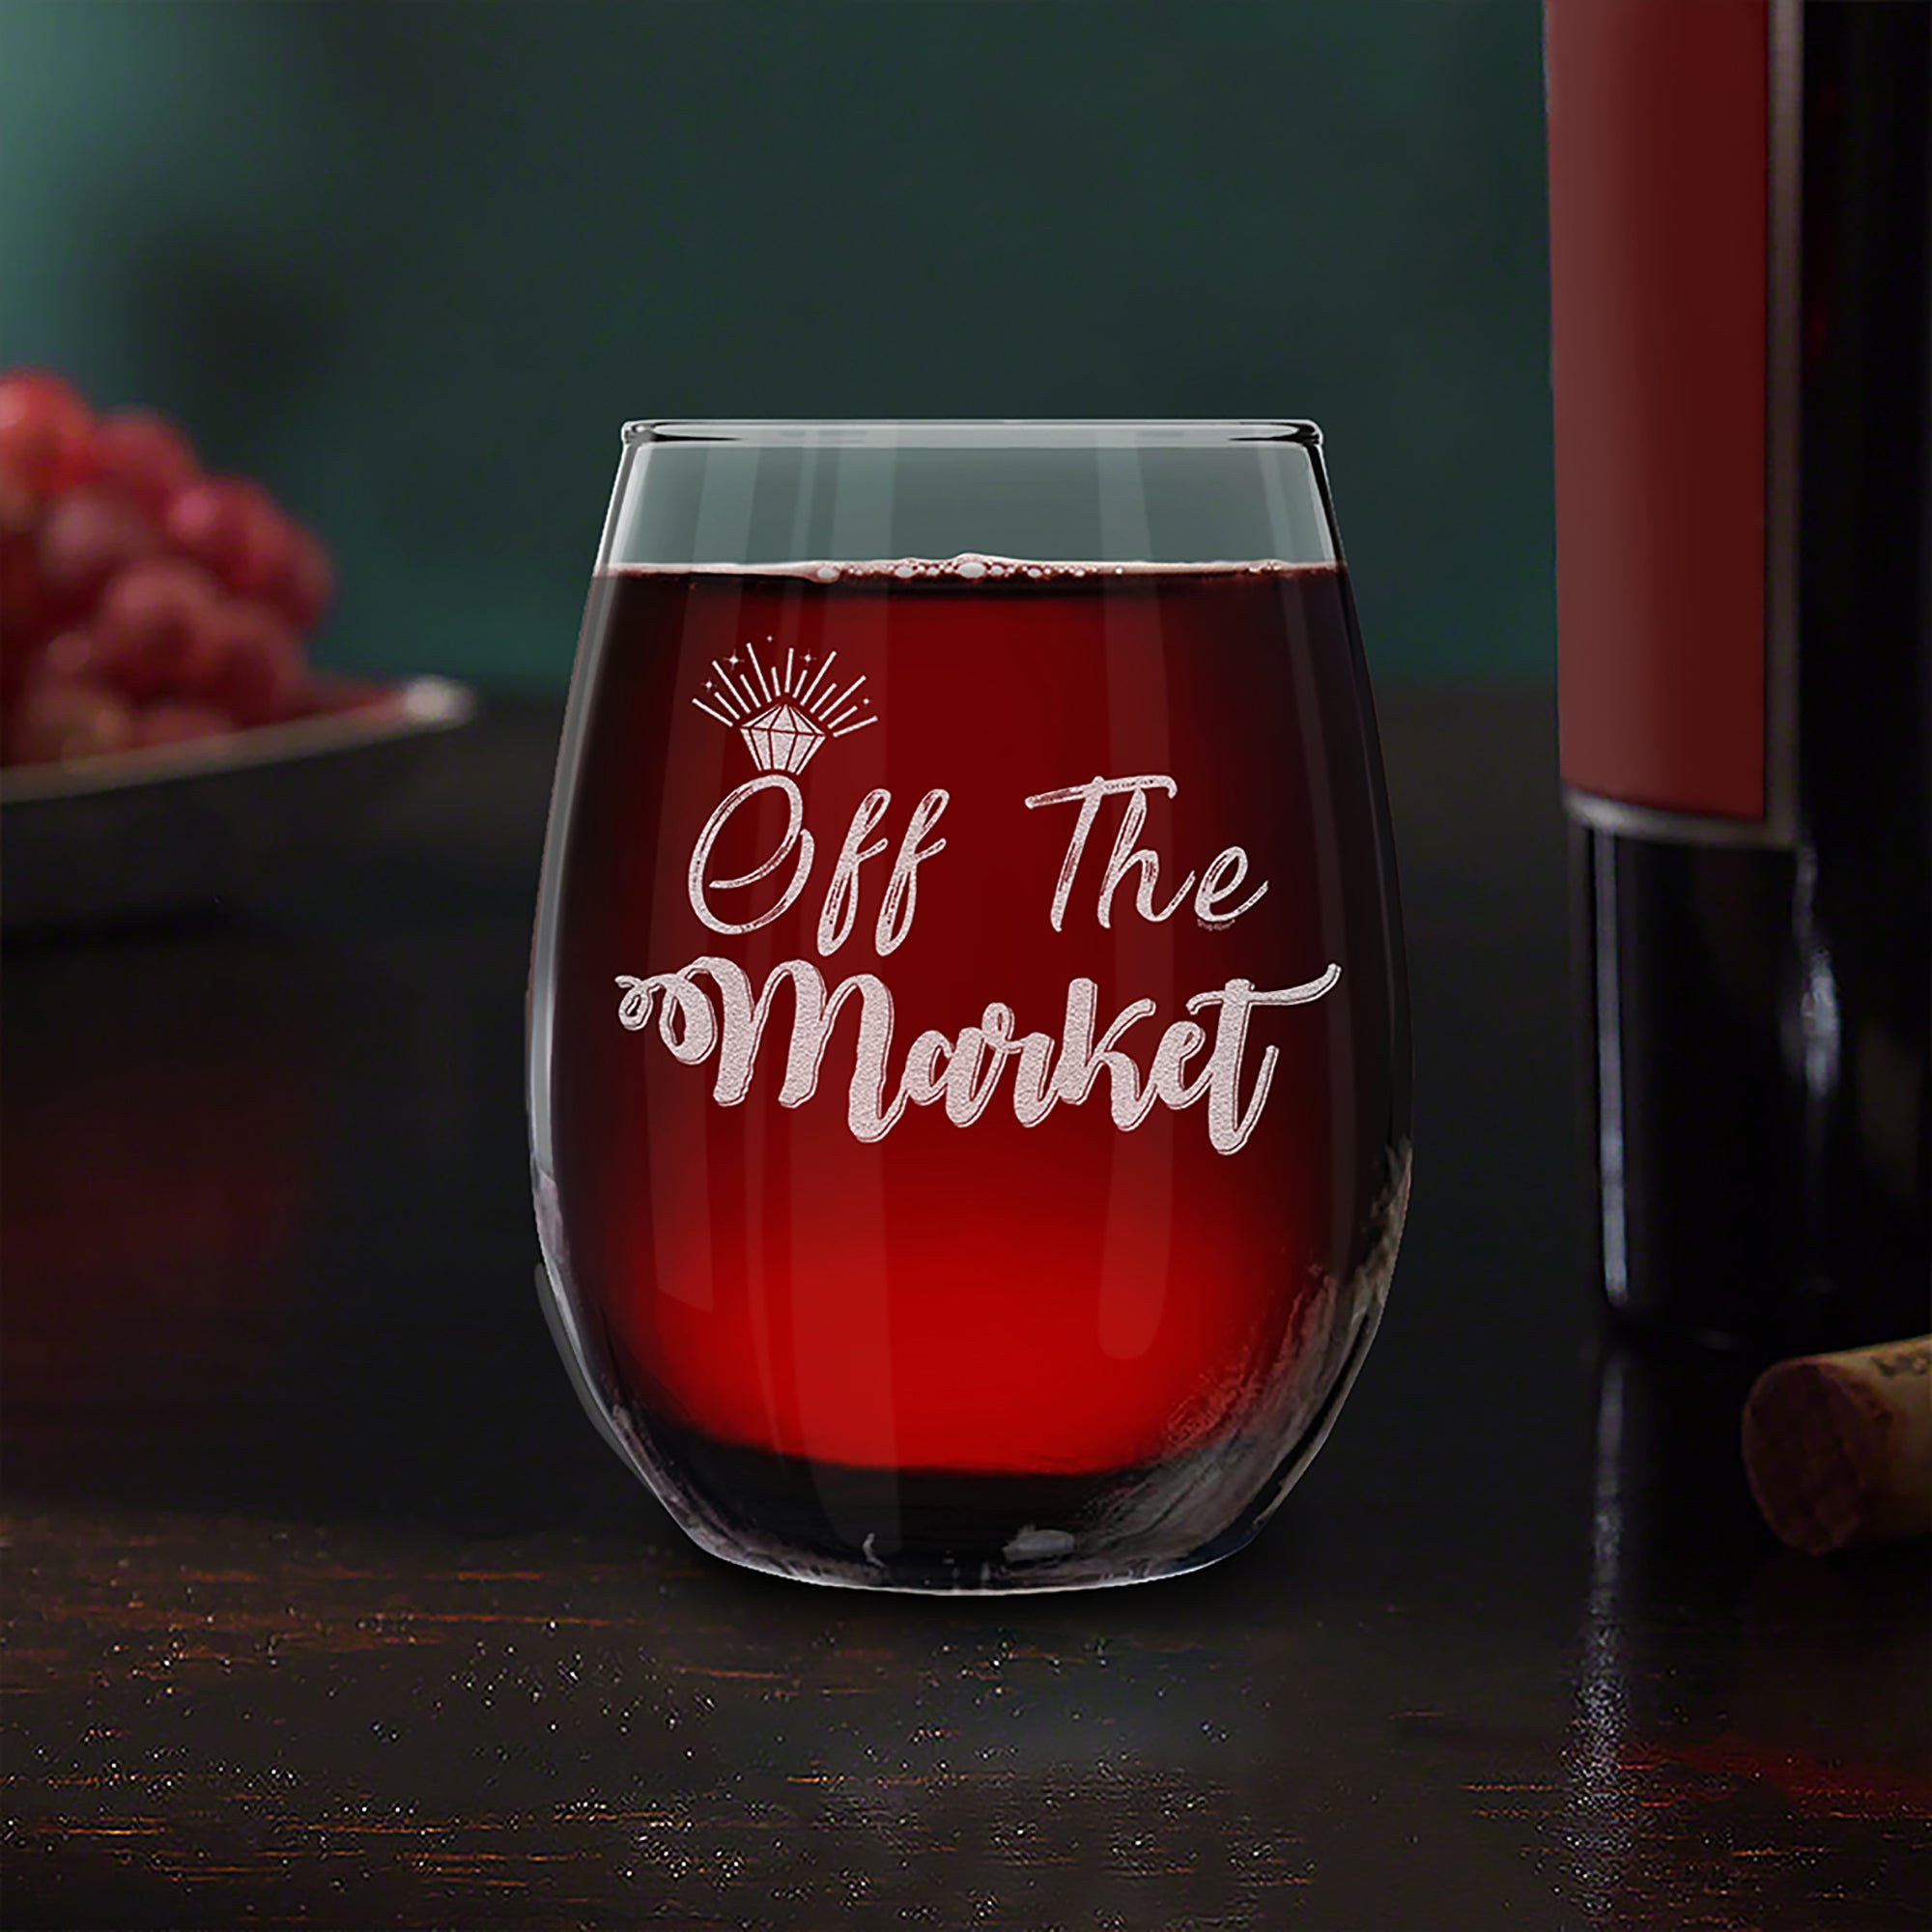 Just Engaged Off The Market Engraved Stemless Wine Glass Newly Engaged Engagement Gift